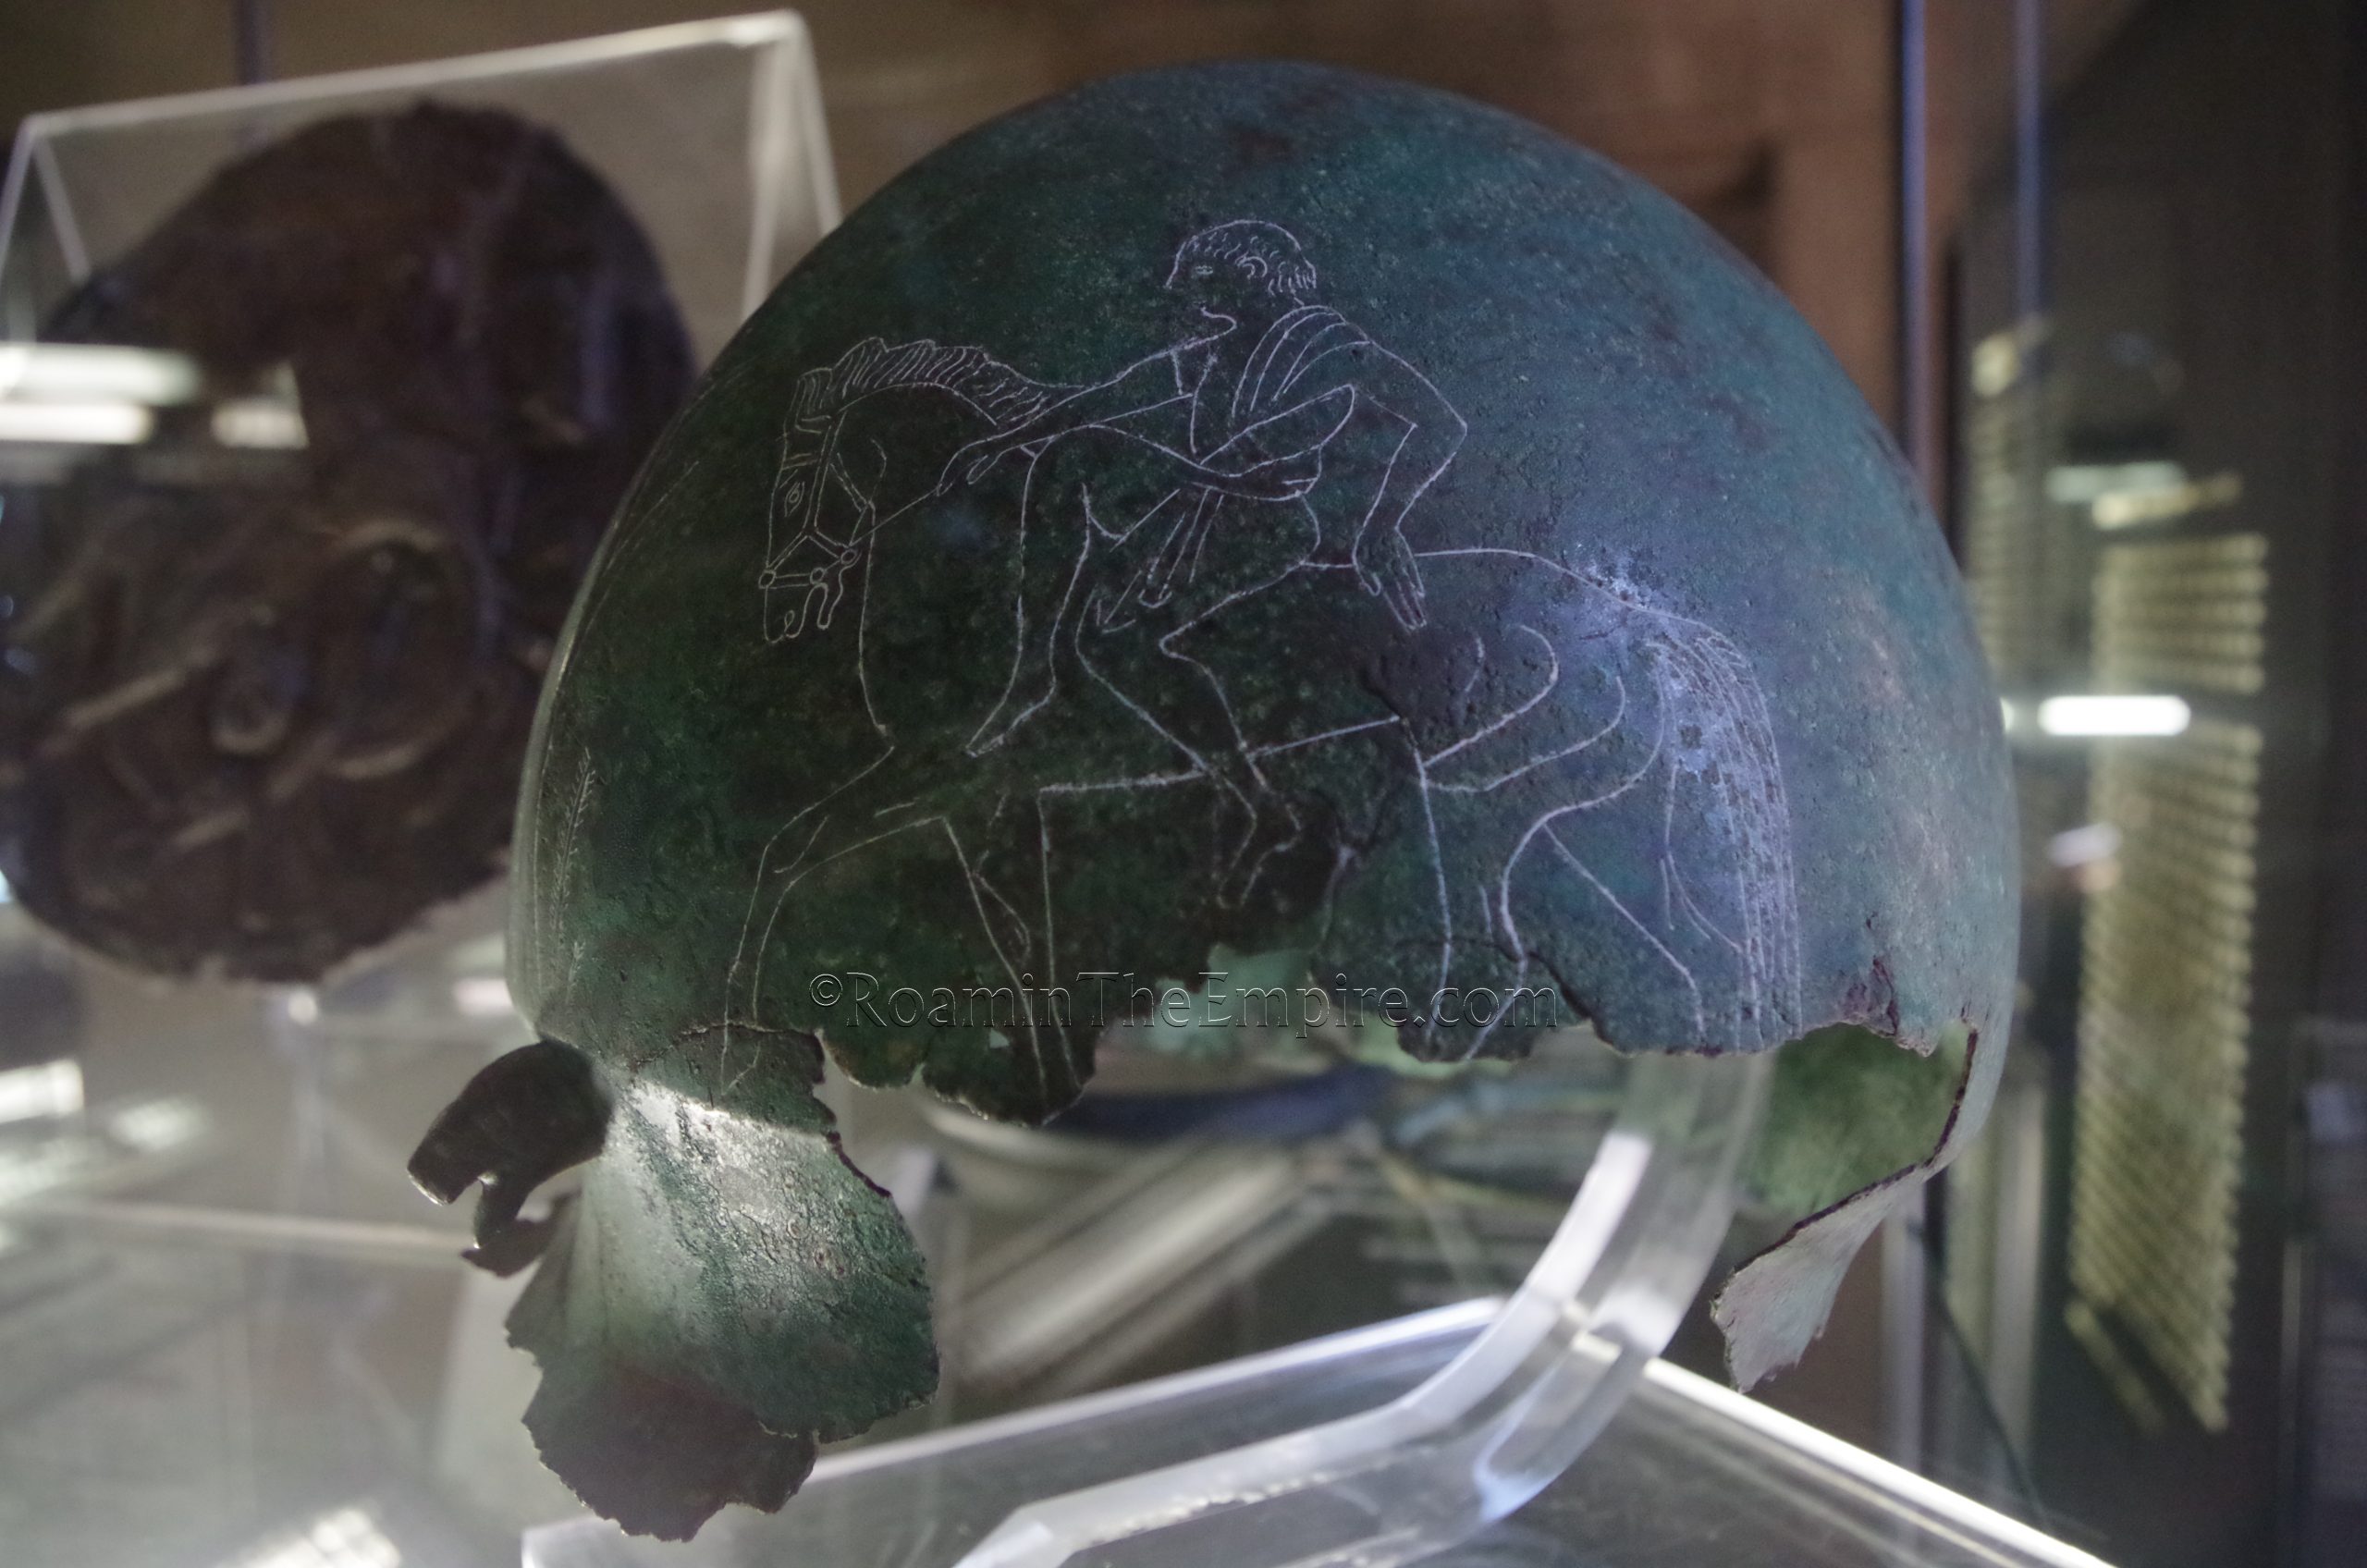 Bronze Negau helmet inscribed with an image of horsemen. From a 6th century BCE Picene necropolis at Rapagnano. Museo Archeologico Nazionale delle Marche.